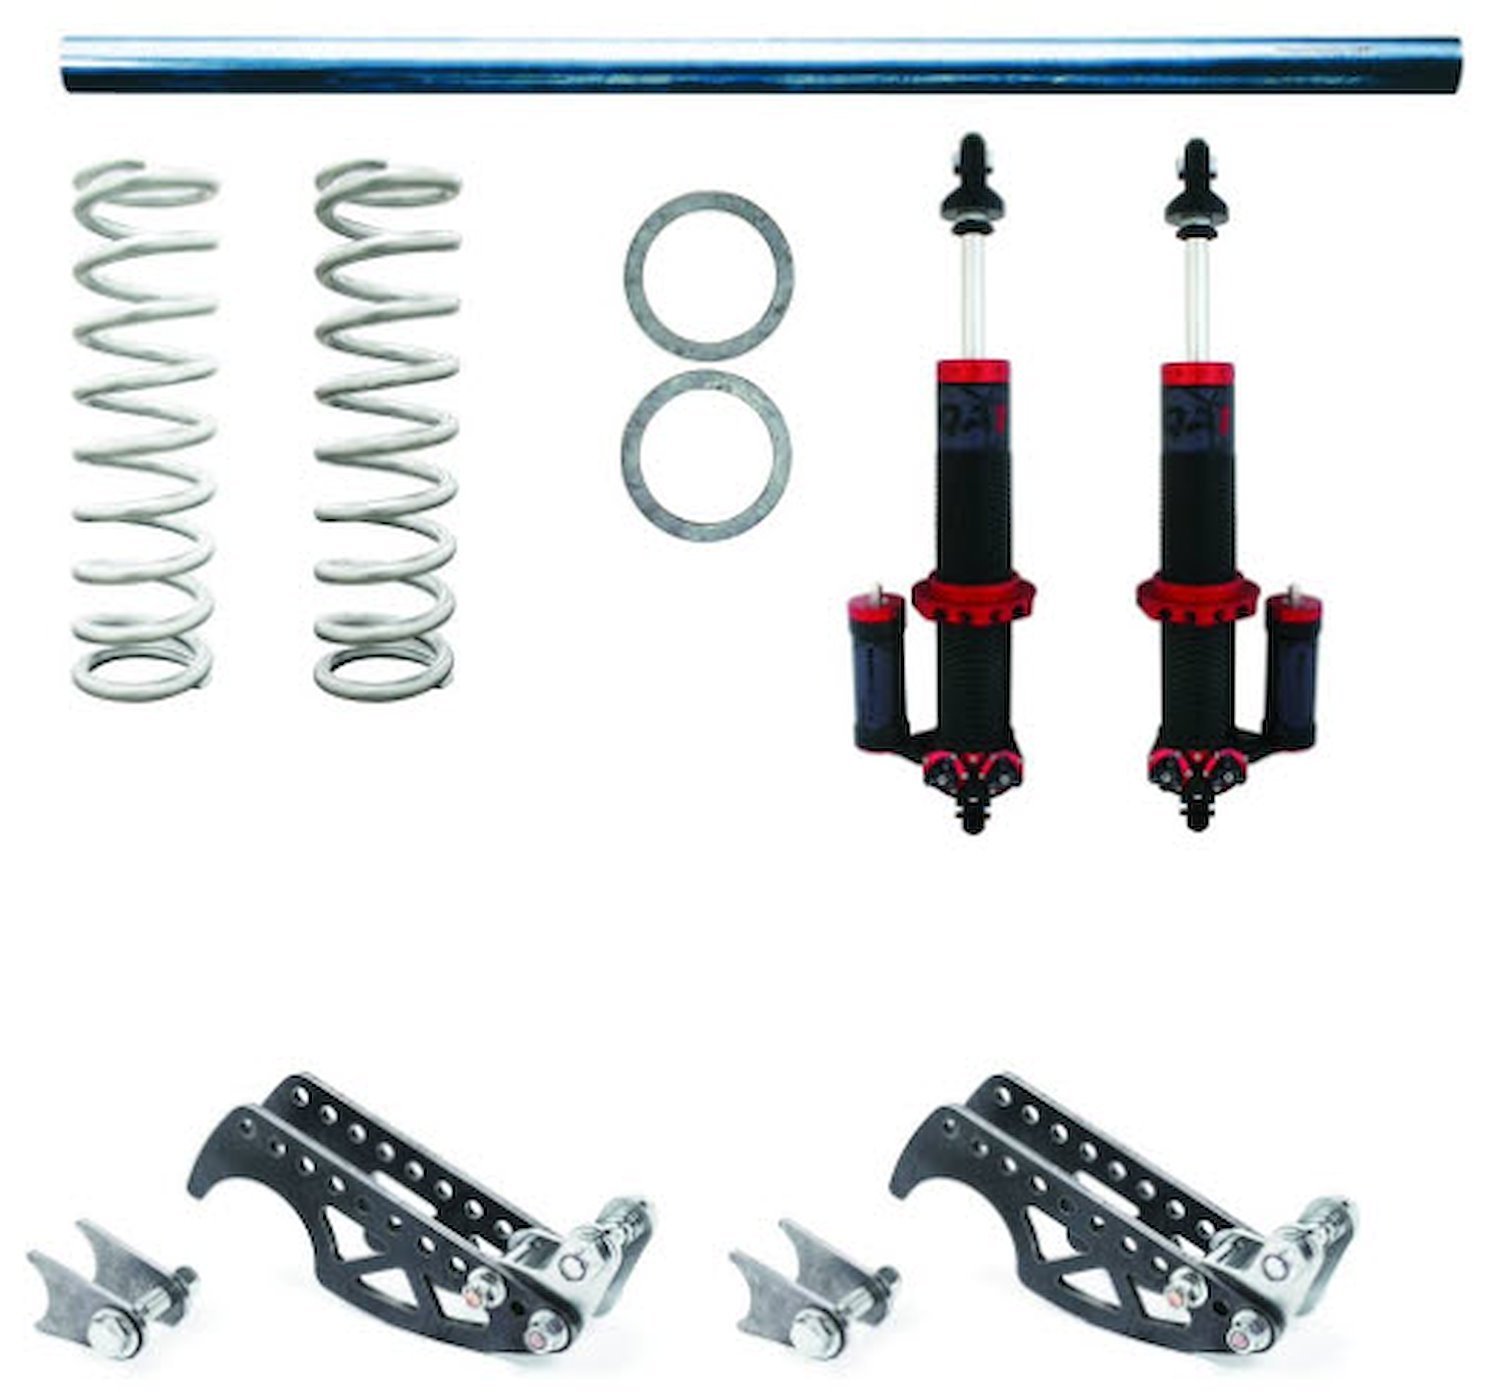 DM501-2001 Heavy-Duty Pro Rear Coil-Over Conversion System for 3 1/4 in. Axle Tubes w/MOD-Series Shocks & 200 lb. Springs